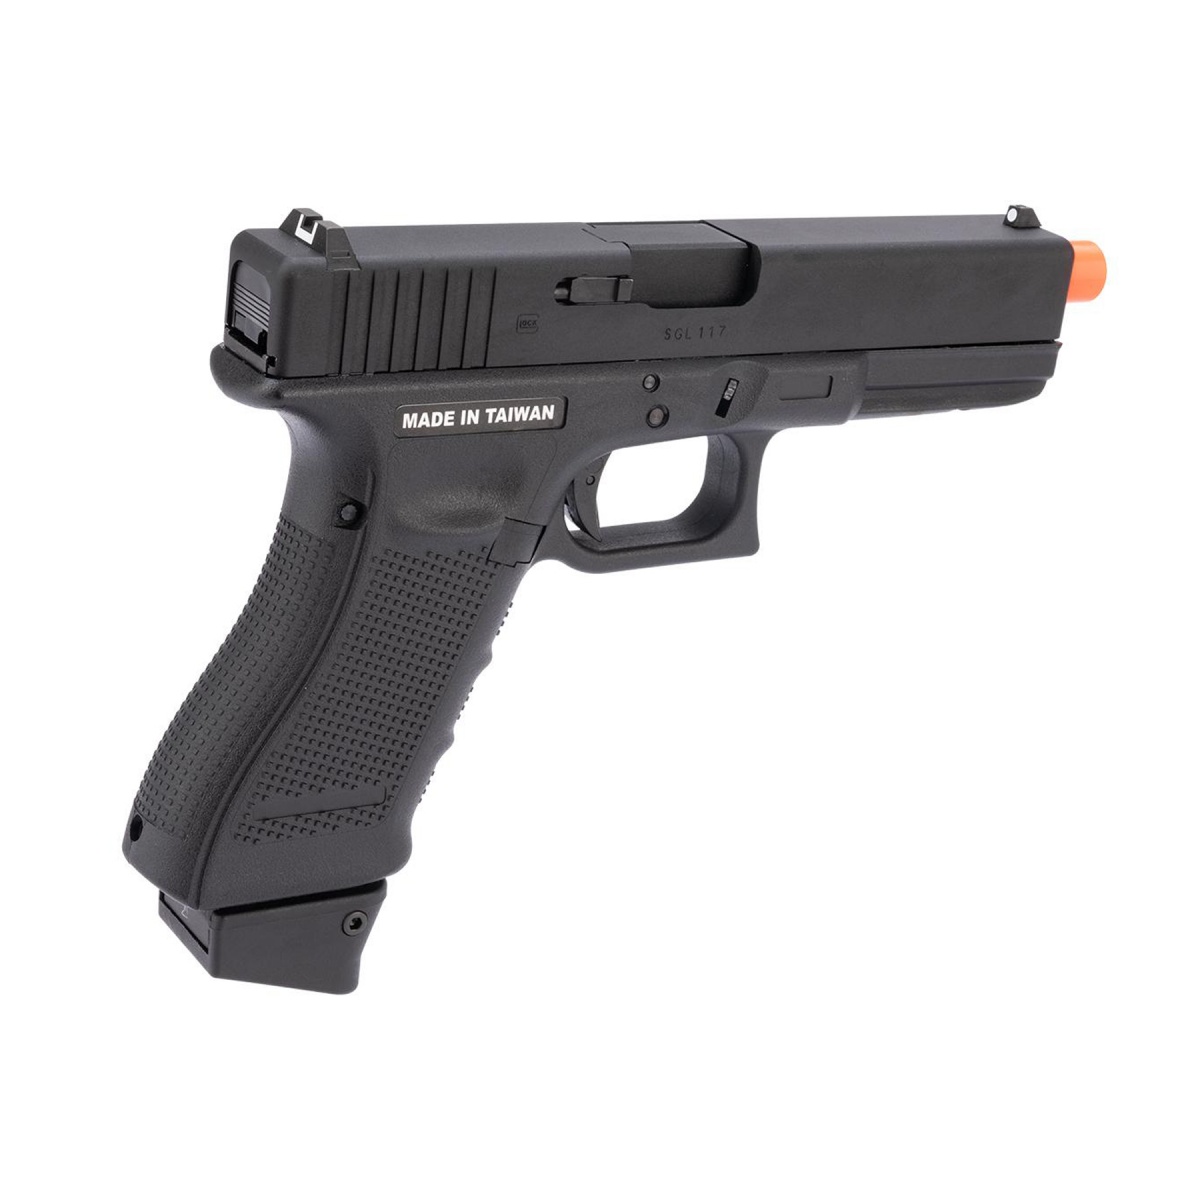 Spartan Licensed GLOCK Blowback Training Pistol - LE / Military ONLY  (Model: G17 Gen.4 / Gun Only), Airsoft Guns, Gas Airsoft Pistols -   Airsoft Superstore